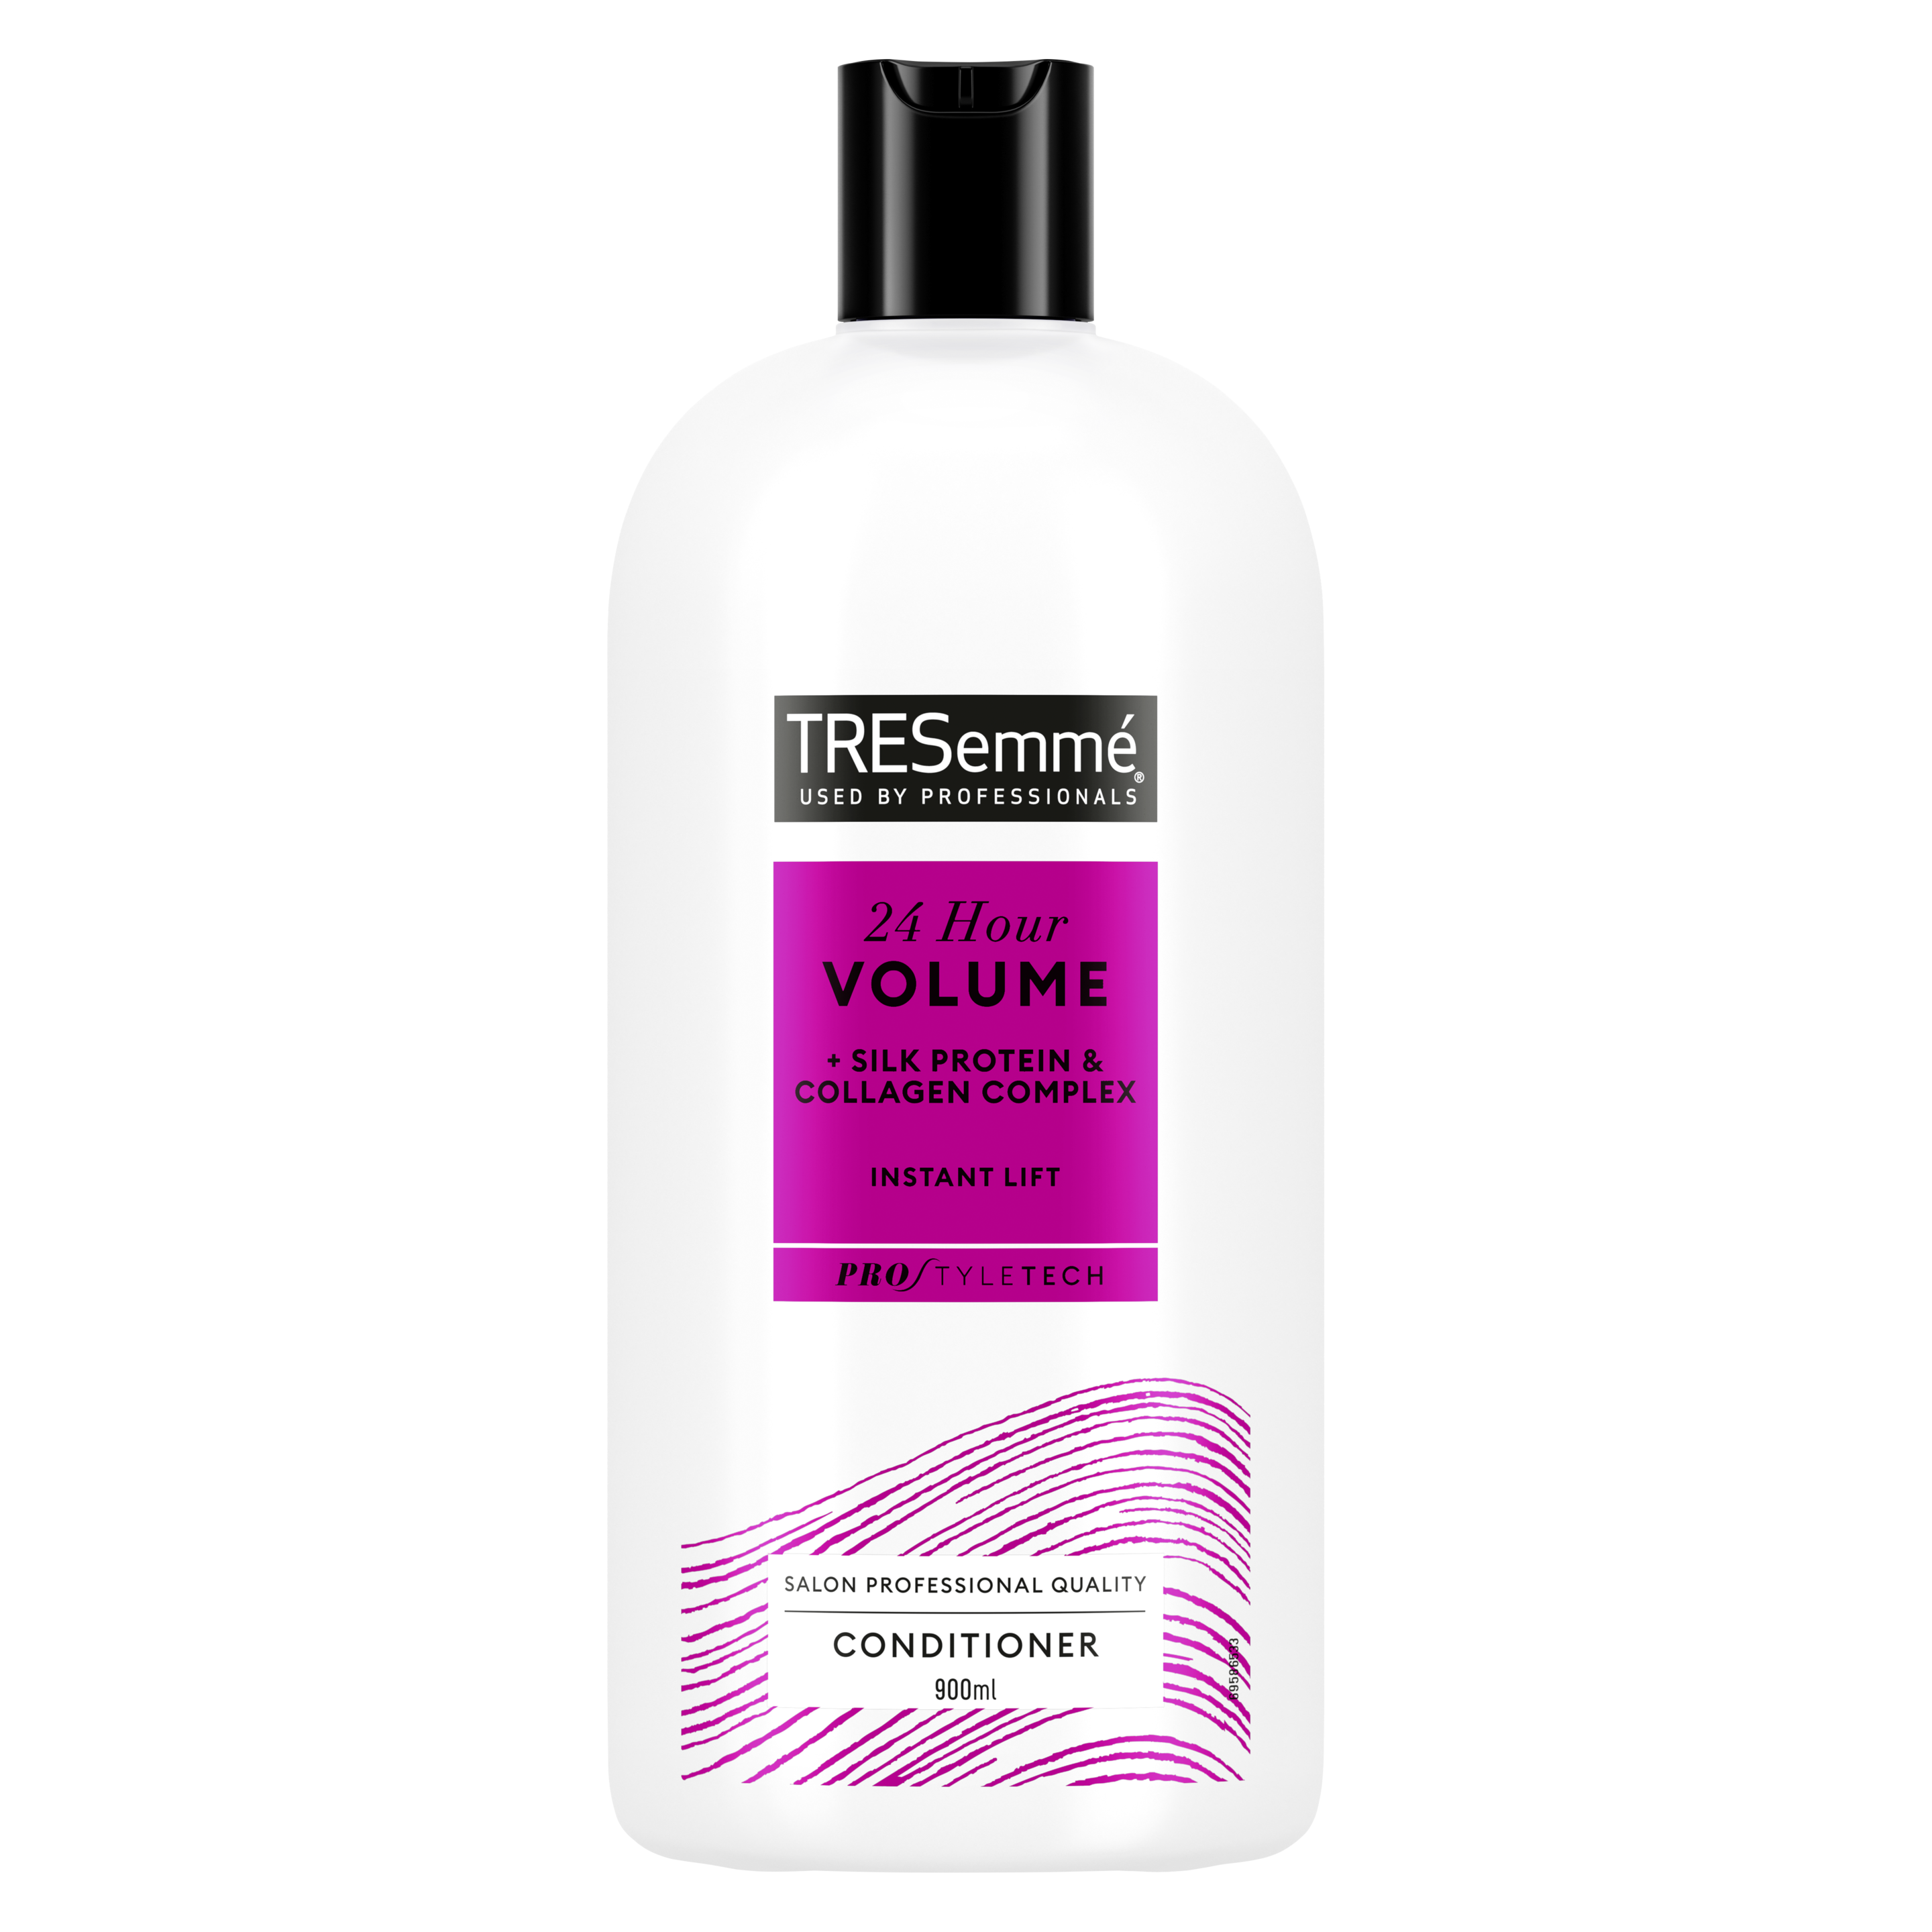 A 900ml bottle of TRESemmé 24 Hour Body & Volume Conditioner front of pack image